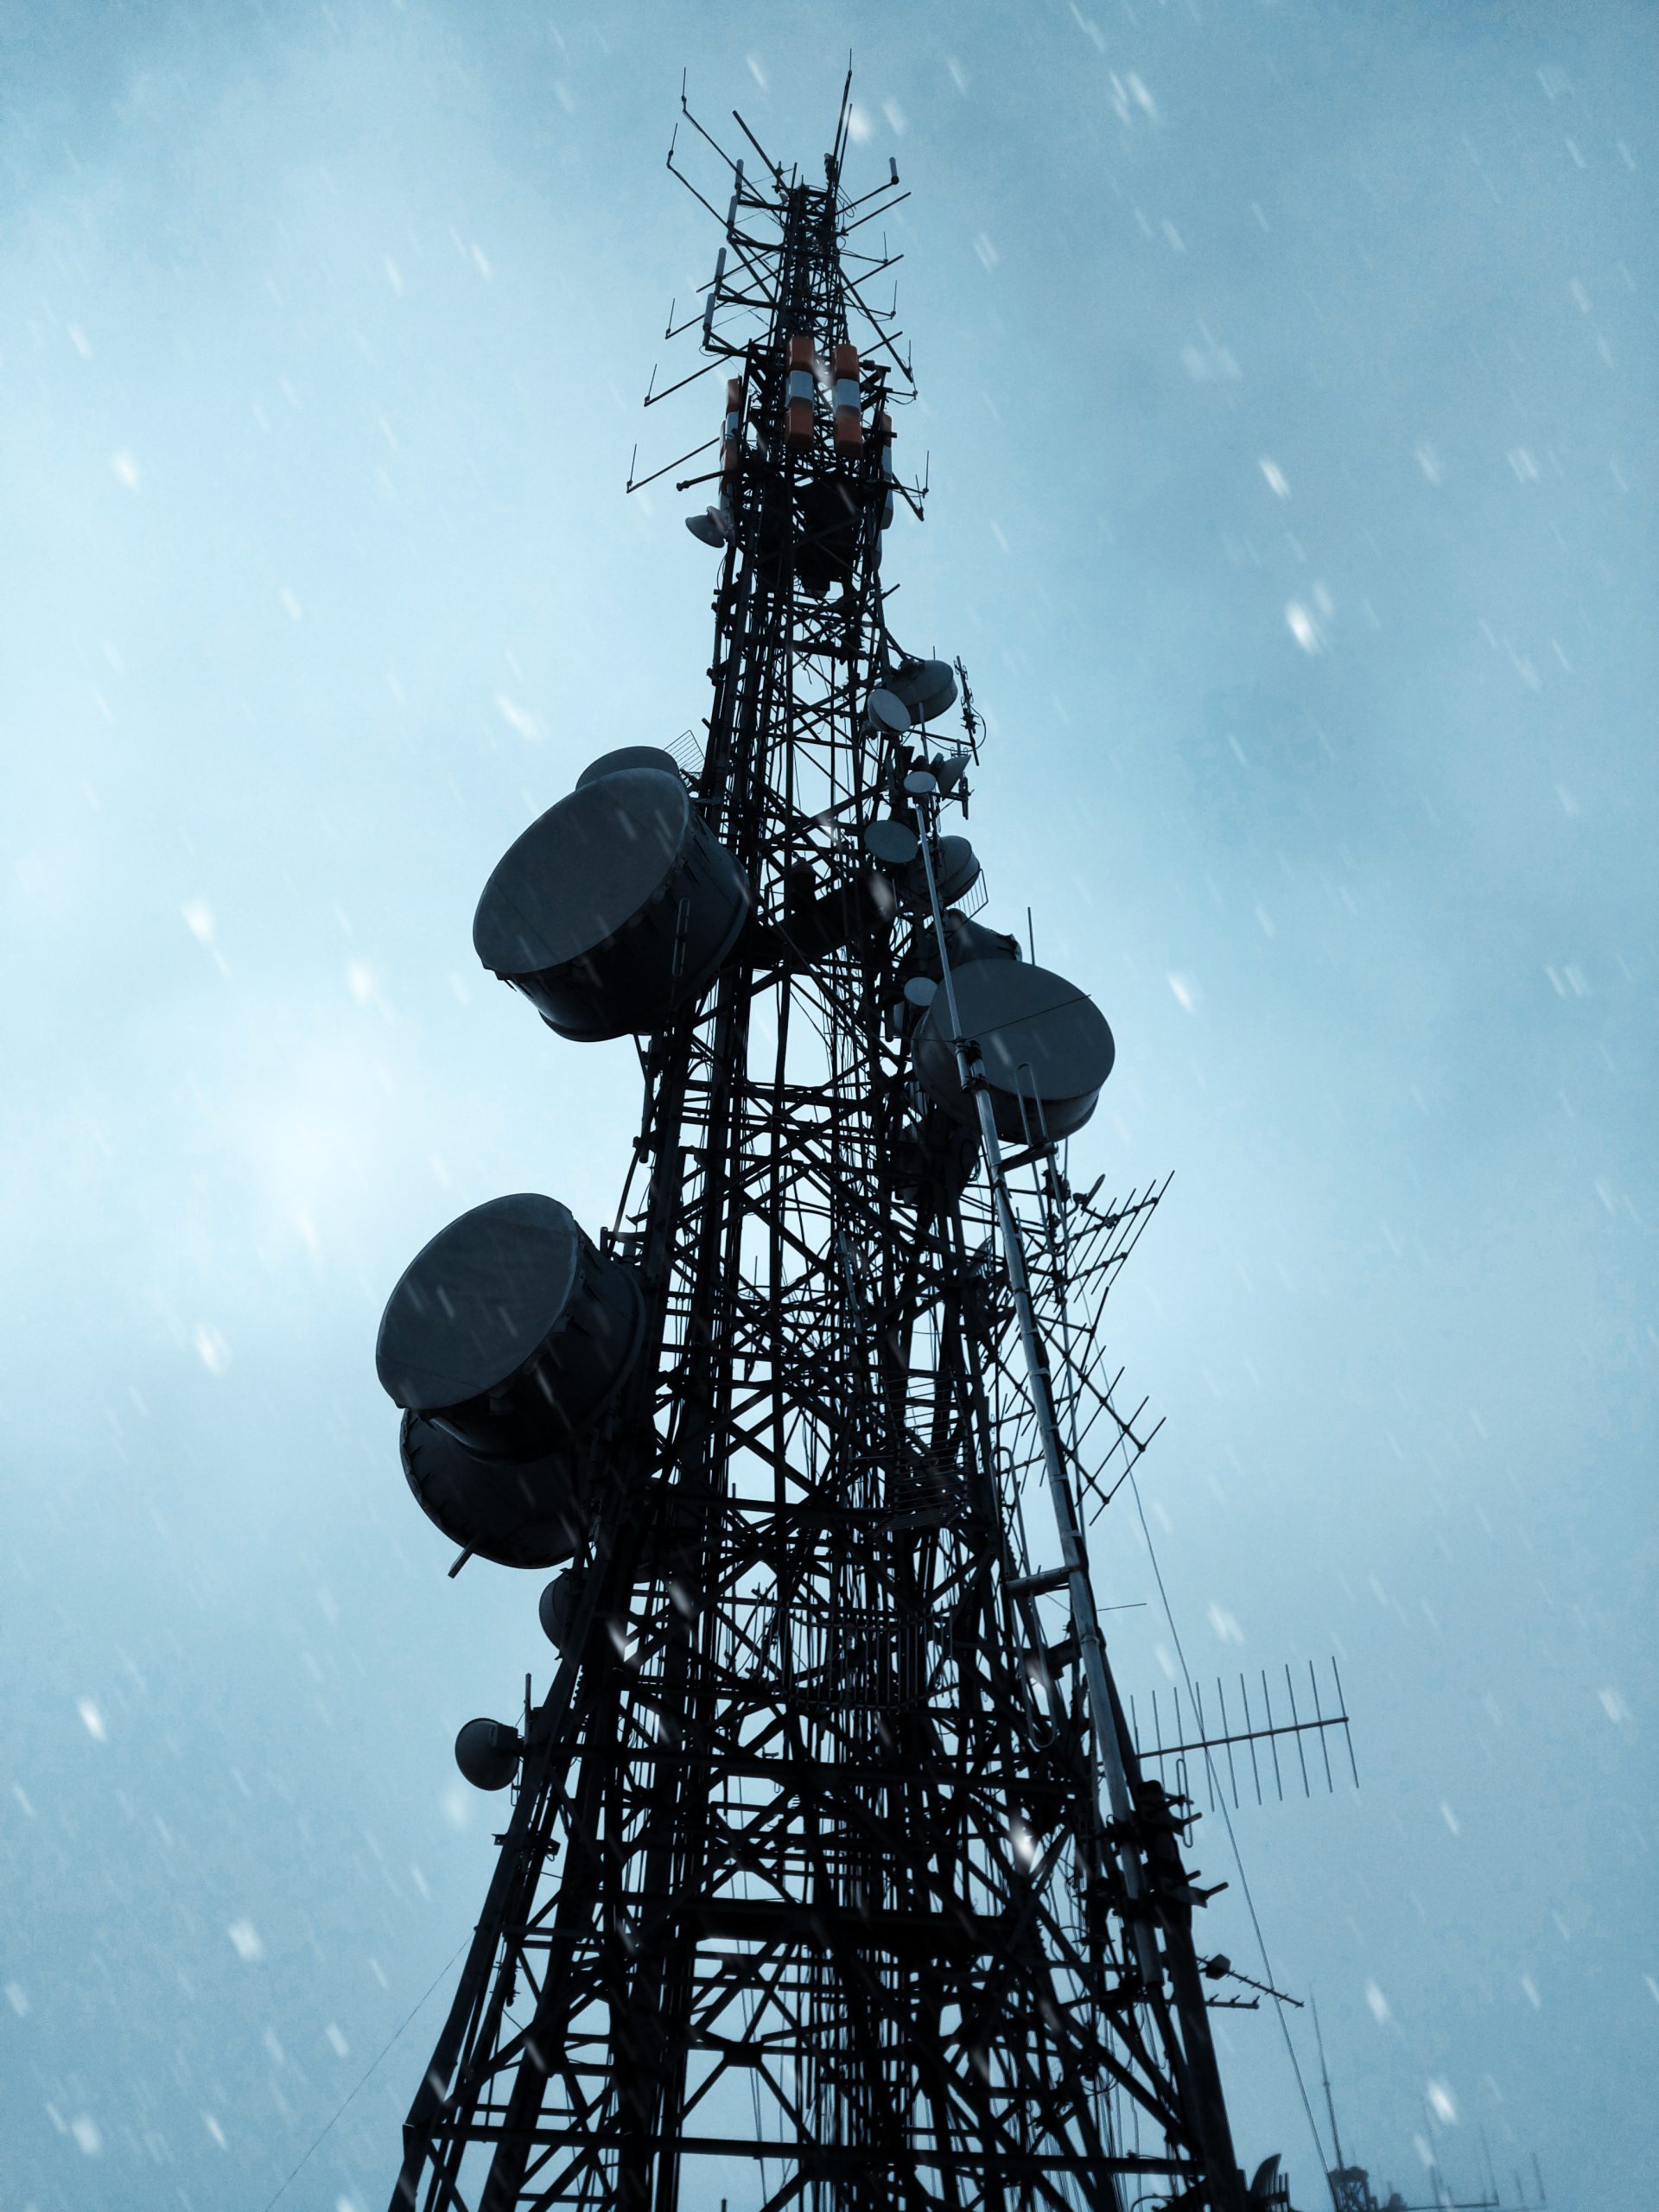 5G Cell Tower